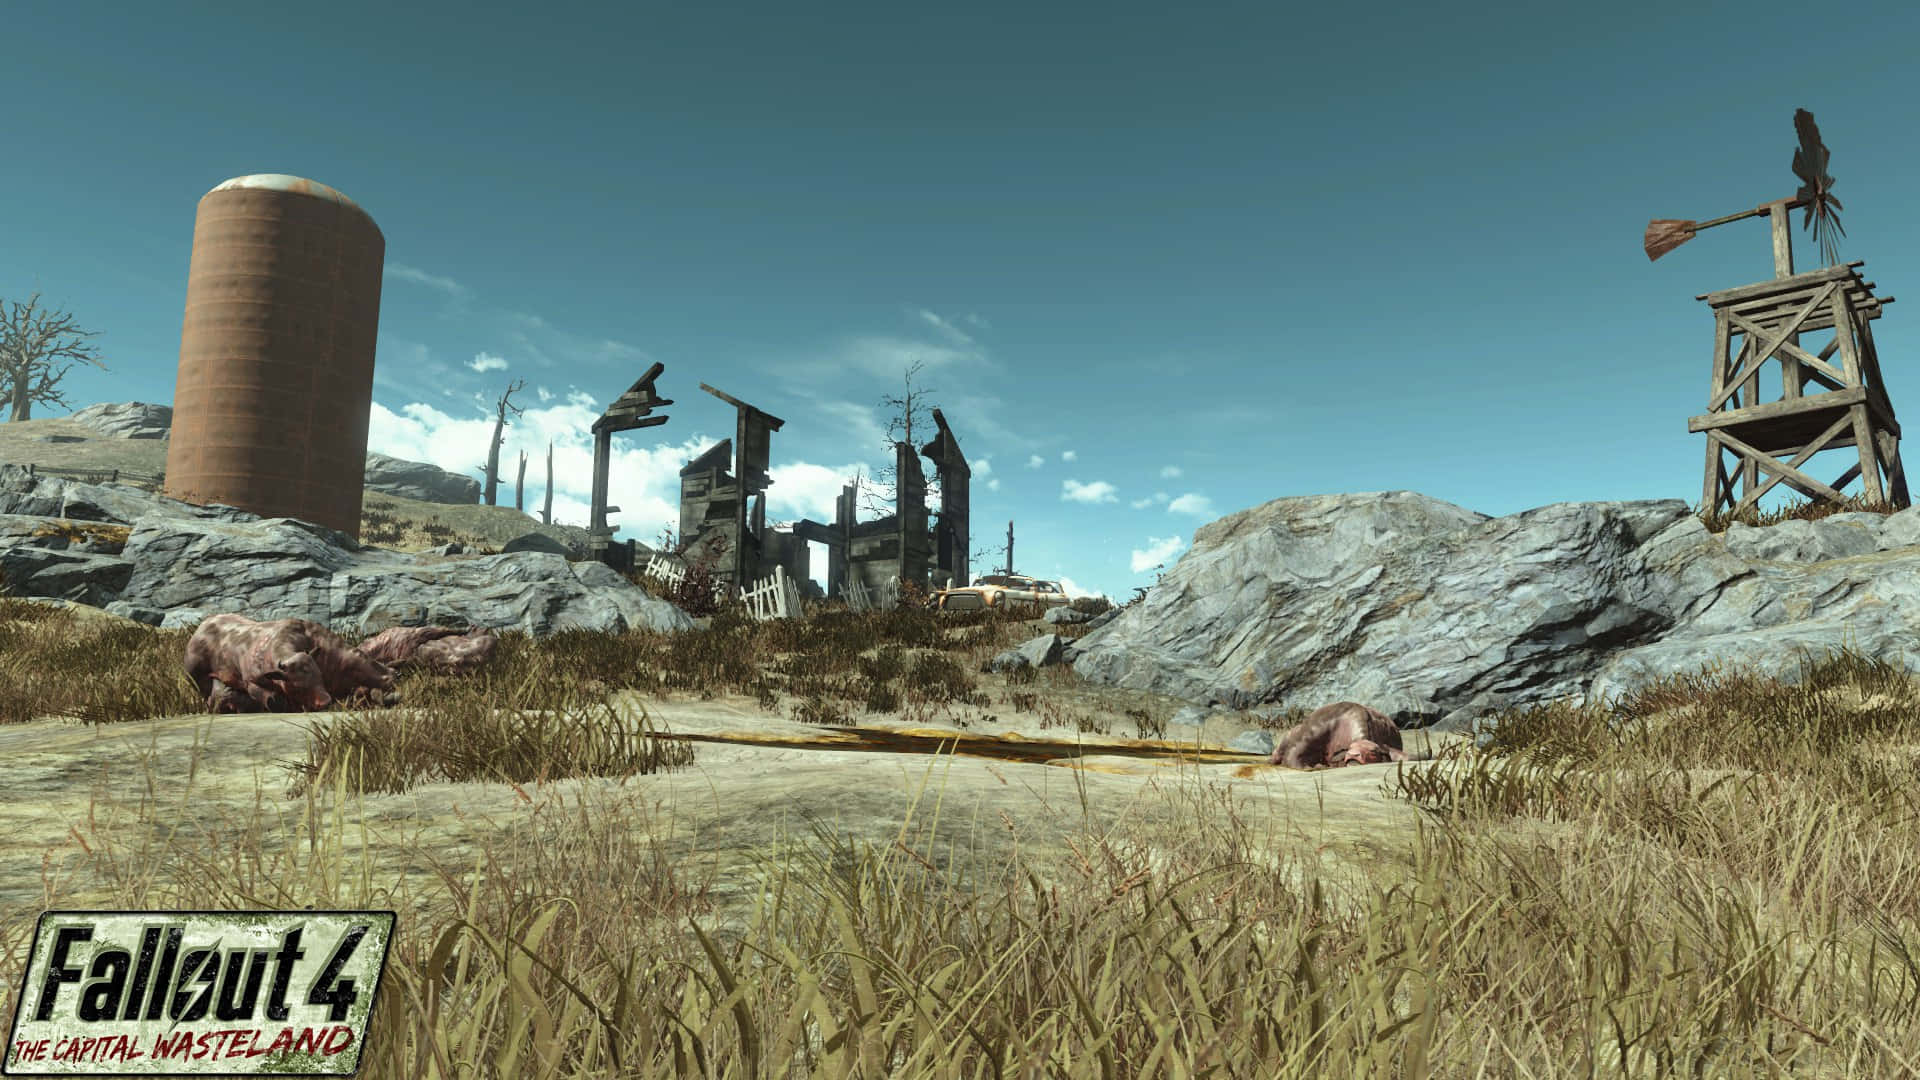 Adventurer exploring the desolate landscape of the Capital Wasteland in Fallout 4 Wallpaper